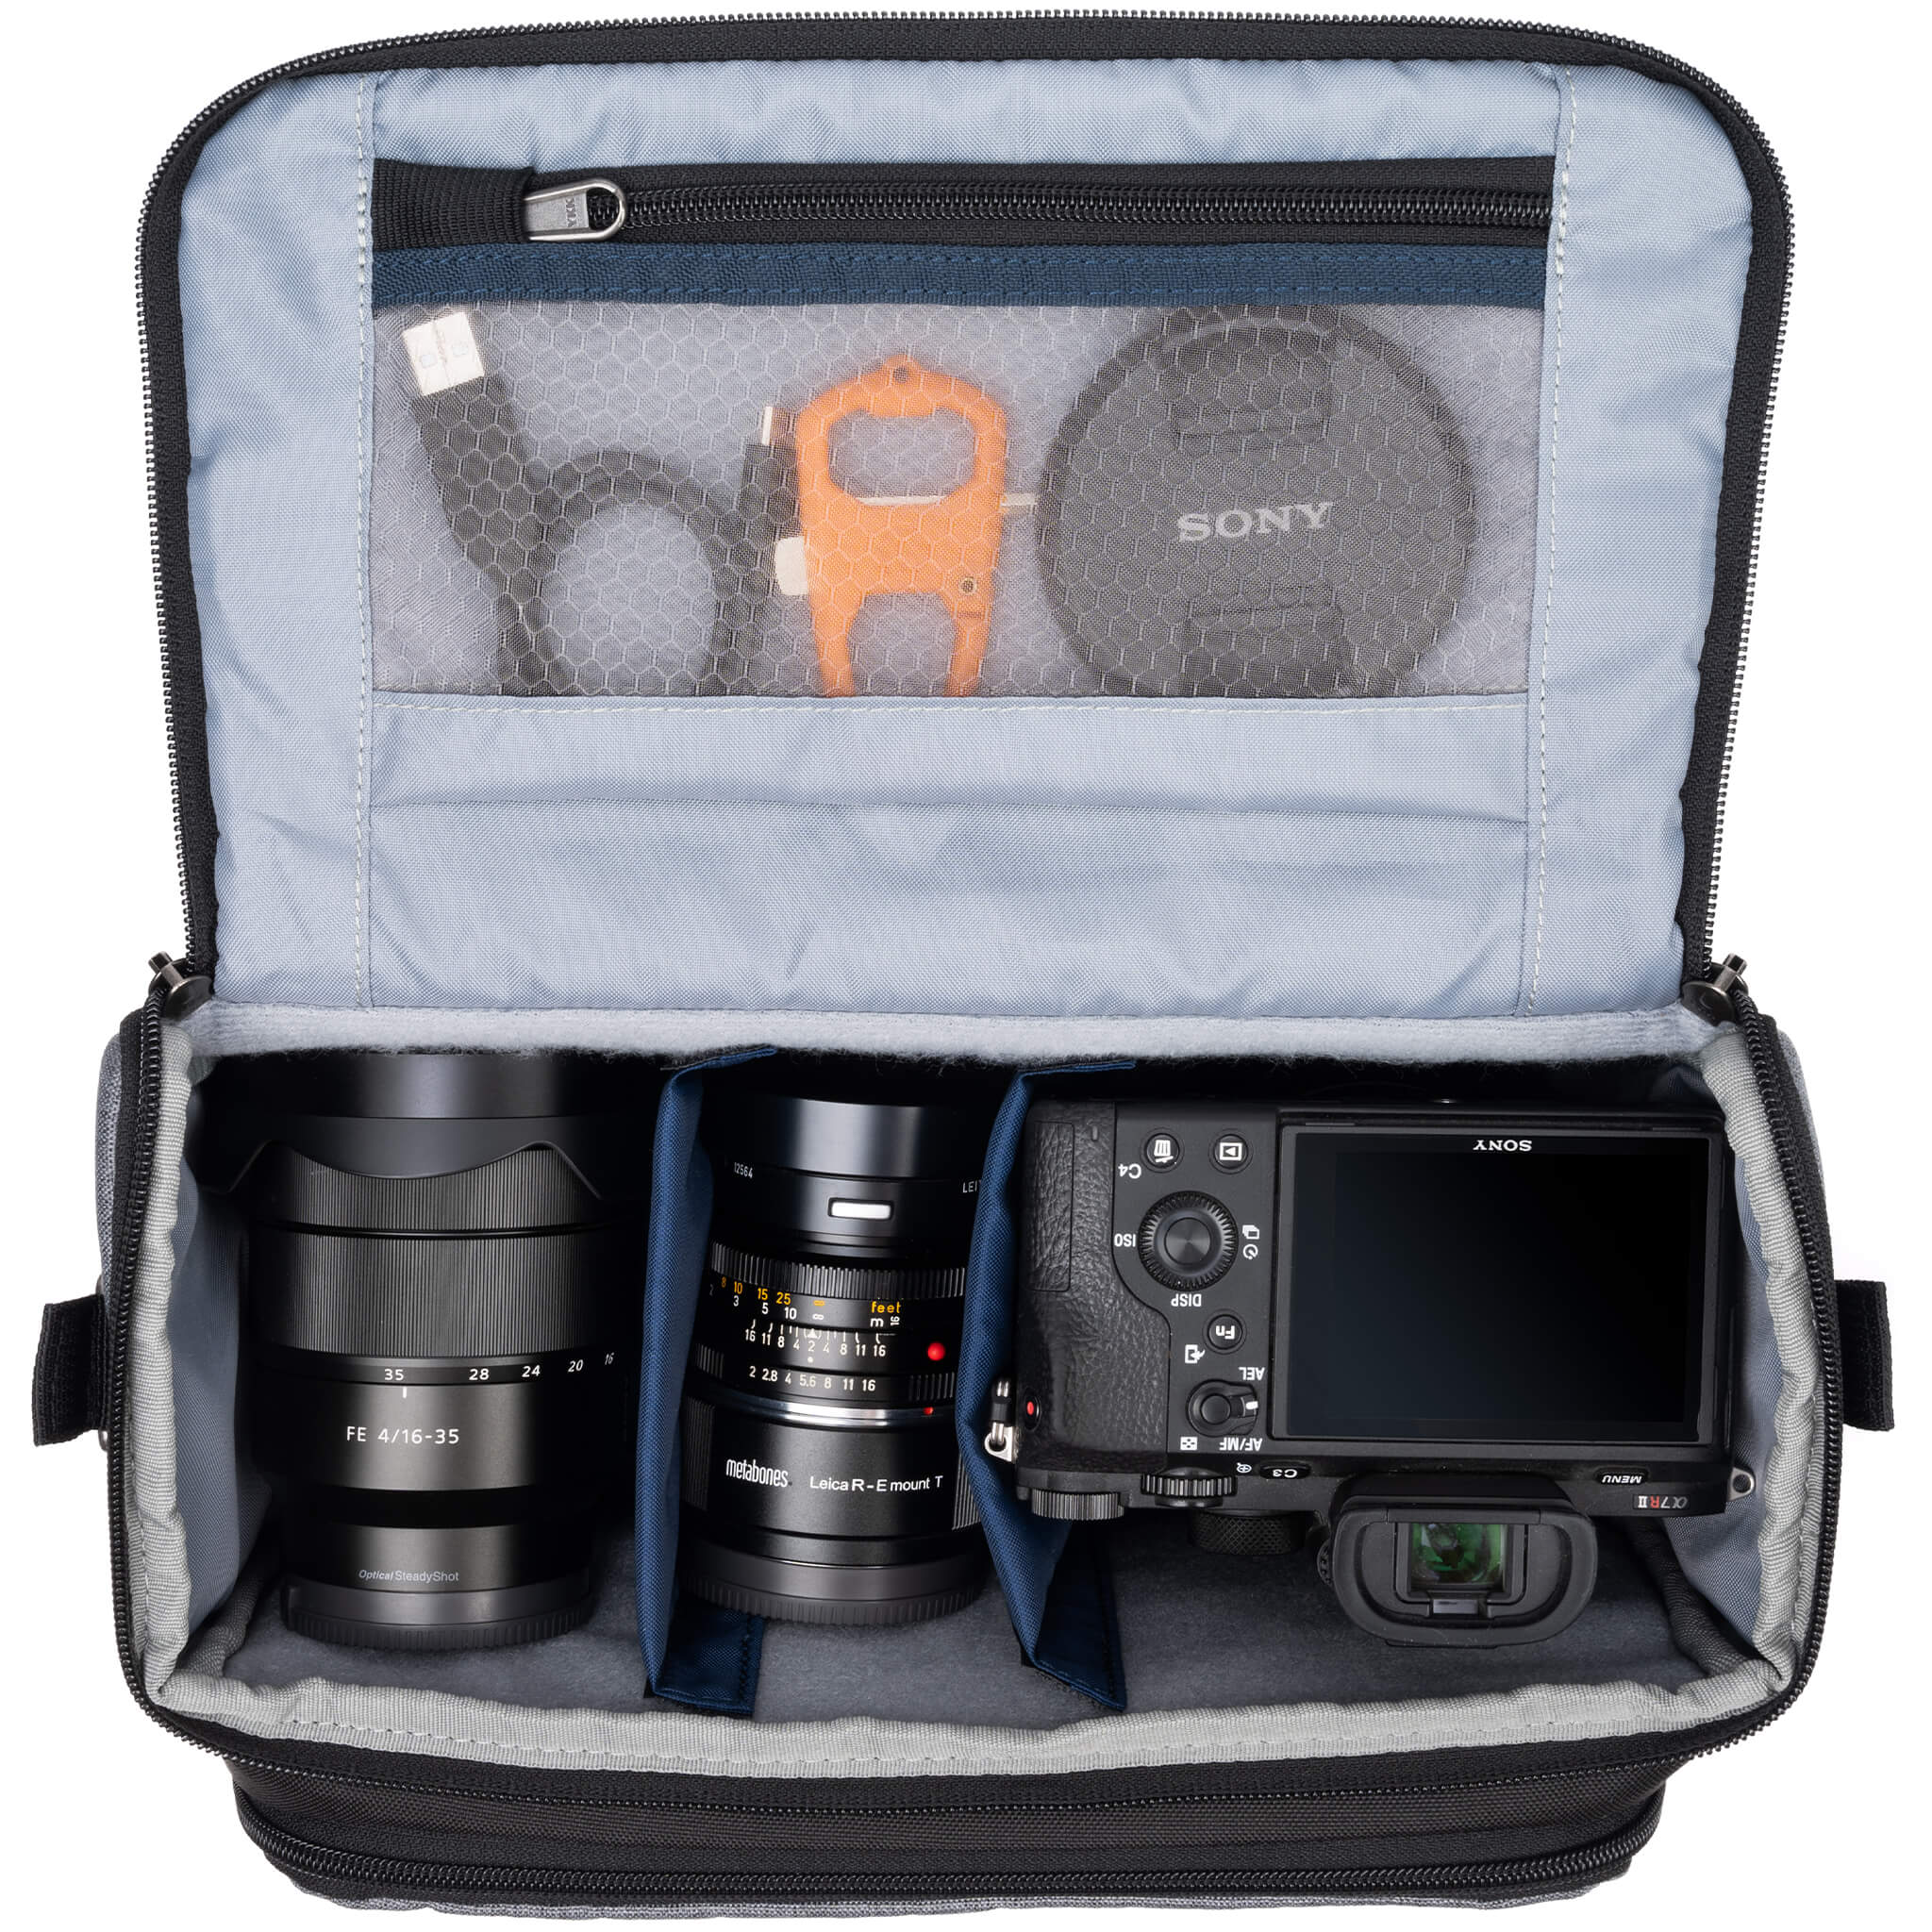 Fits one standard mirrorless body plus 2 to 4 lenses: short to medium f/4 and f/2.8 zooms or short to medium primes.